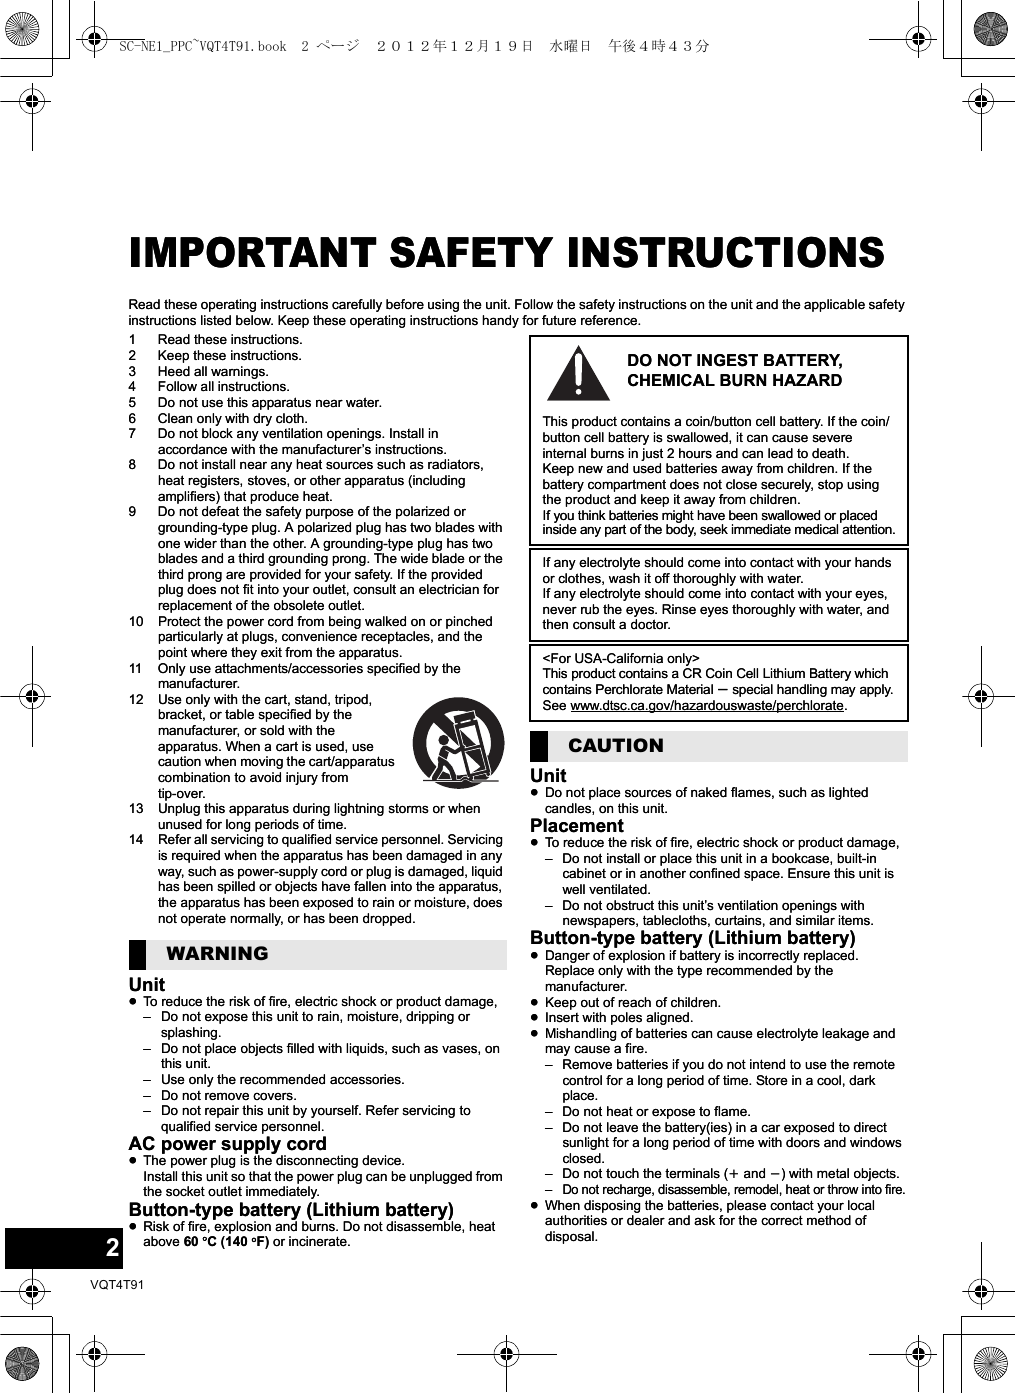 2VQT4T91IMPORTANT SAFETY INSTRUCTIONSRead these operating instructions carefully before using the unit. Follow the safety instructions on the unit and the applicable safety instructions listed below. Keep these operating instructions handy for future reference.1 Read these instructions.2 Keep these instructions.3 Heed all warnings.4 Follow all instructions.5 Do not use this apparatus near water.6 Clean only with dry cloth.7 Do not block any ventilation openings. Install in accordance with the manufacturer’s instructions.8 Do not install near any heat sources such as radiators, heat registers, stoves, or other apparatus (including amplifiers) that produce heat.9 Do not defeat the safety purpose of the polarized or grounding-type plug. A polarized plug has two blades with one wider than the other. A grounding-type plug has two blades and a third grounding prong. The wide blade or the third prong are provided for your safety. If the provided plug does not fit into your outlet, consult an electrician for replacement of the obsolete outlet.10 Protect the power cord from being walked on or pinched particularly at plugs, convenience receptacles, and the point where they exit from the apparatus.11 Only use attachments/accessories specified by the manufacturer.12 Use only with the cart, stand, tripod, bracket, or table specified by the manufacturer, or sold with the apparatus. When a cart is used, use caution when moving the cart/apparatus combination to avoid injury from tip-over.13 Unplug this apparatus during lightning storms or when unused for long periods of time.14 Refer all servicing to qualified service personnel. Servicing is required when the apparatus has been damaged in any way, such as power-supply cord or plug is damaged, liquid has been spilled or objects have fallen into the apparatus, the apparatus has been exposed to rain or moisture, does not operate normally, or has been dropped.Unit≥To reduce the risk of fire, electric shock or product damage,– Do not expose this unit to rain, moisture, dripping or splashing.– Do not place objects filled with liquids, such as vases, on this unit.– Use only the recommended accessories.– Do not remove covers.– Do not repair this unit by yourself. Refer servicing to qualified service personnel.AC power supply cord≥The power plug is the disconnecting device. Install this unit so that the power plug can be unplugged from the socket outlet immediately.Button-type battery (Lithium battery)≥Risk of fire, explosion and burns. Do not disassemble, heat above 60 oC (140 oF) or incinerate.Unit≥Do not place sources of naked flames, such as lighted candles, on this unit.Placement≥To reduce the risk of fire, electric shock or product damage,– Do not install or place this unit in a bookcase, built-in cabinet or in another confined space. Ensure this unit is well ventilated.– Do not obstruct this unit’s ventilation openings with newspapers, tablecloths, curtains, and similar items.Button-type battery (Lithium battery)≥Danger of explosion if battery is incorrectly replaced. Replace only with the type recommended by the manufacturer.≥Keep out of reach of children.≥Insert with poles aligned.≥Mishandling of batteries can cause electrolyte leakage and may cause a fire.– Remove batteries if you do not intend to use the remote control for a long period of time. Store in a cool, dark place.– Do not heat or expose to flame.– Do not leave the battery(ies) in a car exposed to direct sunlight for a long period of time with doors and windows closed.– Do not touch the terminals (i and j) with metal objects.– Do not recharge, disassemble, remodel, heat or throw into fire.≥When disposing the batteries, please contact your local authorities or dealer and ask for the correct method of disposal.WARNINGDO NOT INGEST BATTERY, CHEMICAL BURN HAZARDThis product contains a coin/button cell battery. If the coin/button cell battery is swallowed, it can cause severe internal burns in just 2 hours and can lead to death.Keep new and used batteries away from children. If the battery compartment does not close securely, stop using the product and keep it away from children.If you think batteries might have been swallowed or placed inside any part of the body, seek immediate medical attention.If any electrolyte should come into contact with your hands or clothes, wash it off thoroughly with water.If any electrolyte should come into contact with your eyes, never rub the eyes. Rinse eyes thoroughly with water, and then consult a doctor.&lt;For USA-California only&gt;This product contains a CR Coin Cell Lithium Battery which contains Perchlorate Material s special handling may apply.See www.dtsc.ca.gov/hazardouswaste/perchlorate.CAUTIONIMPORTANT SAFETY INSTRUCTIONSRead these operating instructions carefully before using the unit. Follow the safety instructions on the unit and the applicable safety instructions listed below. Keep these operating instructions handy for future reference.1 Read these instructions.2 Keep these instructions.3 Heed all warnings.4 Follow all instructions.5 Do not use this apparatus near water.6 Clean only with dry cloth.7 Do not block any ventilation openings. Install in accordance with the manufacturer’s instructions.8 Do not install near any heat sources such as radiators, heat registers, stoves, or other apparatus (including amplifiers) that produce heat.9 Do not defeat the safety purpose of the polarized or grounding-type plug. A polarized plug has two blades with one wider than the other. A grounding-type plug has two blades and a third grounding prong. The wide blade or the third prong are provided for your safety. If the provided plug does not fit into your outlet, consult an electrician for replacement of the obsolete outlet.10 Protect the power cord from being walked on or pinched particularly at plugs, convenience receptacles, and the point where they exit from the apparatus.11 Only use attachments/accessories specified by the manufacturer.12 Use only with the cart, stand, tripod, bracket, or table specified by the manufacturer, or sold with the apparatus. When a cart is used, use caution when moving the cart/apparatus combination to avoid injury from tip-over.13 Unplug this apparatus during lightning storms or when unused for long periods of time.14 Refer all servicing to qualified service personnel. Servicing is required when the apparatus has been damaged in any way, such as power-supply cord or plug is damaged, liquid has been spilled or objects have fallen into the apparatus, the apparatus has been exposed to rain or moisture, does not operate normally, or has been dropped.Unit≥To reduce the risk of fire, electric shock or product damage,– Do not expose this unit to rain, moisture, dripping or splashing.– Do not place objects filled with liquids, such as vases, on this unit.– Use only the recommended accessories.– Do not remove covers.– Do not repair this unit by yourself. Refer servicing to qualified service personnel.AC power supply cord≥The power plug is the disconnecting device. Install this unit so that the power plug can be unplugged from the socket outlet immediately.Button-type battery (Lithium battery)≥Risk of fire, explosion and burns. Do not disassemble, heat above 60 oC (140 oF) or incinerate.Unit≥Do not place sources of naked flames, such as lighted candles, on this unit.Placement≥To reduce the risk of fire, electric shock or product damage,– Do not install or place this unit in a bookcase, built-in cabinet or in another confined space. Ensure this unit is well ventilated.– Do not obstruct this unit’s ventilation openings with newspapers, tablecloths, curtains, and similar items.Button-type battery (Lithium battery)≥Danger of explosion if battery is incorrectly replaced. Replace only with the type recommended by the manufacturer.≥Keep out of reach of children.≥Insert with poles aligned.≥Mishandling of batteries can cause electrolyte leakage and may cause a fire.– Remove batteries if you do not intend to use the remote control for a long period of time. Store in a cool, dark place.– Do not heat or expose to flame.– Do not leave the battery(ies) in a car exposed to direct sunlight for a long period of time with doors and windows closed.– Do not touch the terminals (i and j) with metal objects.– Do not recharge, disassemble, remodel, heat or throw into fire.≥When disposing the batteries, please contact your local authorities or dealer and ask for the correct method of disposal.WARNINGDO NOT INGEST BATTERY, CHEMICAL BURN HAZARDThis product contains a coin/button cell battery. If the coin/button cell battery is swallowed, it can cause severe internal burns in just 2 hours and can lead to death.Keep new and used batteries away from children. If the battery compartment does not close securely, stop using the product and keep it away from children.If you think batteries might have been swallowed or placed inside any part of the body, seek immediate medical attention.If any electrolyte should come into contact with your hands or clothes, wash it off thoroughly with water.If any electrolyte should come into contact with your eyes, never rub the eyes. Rinse eyes thoroughly with water, and then consult a doctor.&lt;For USA-California only&gt;This product contains a CR Coin Cell Lithium Battery which contains Perchlorate Material s special handling may apply.See www.dtsc.ca.gov/hazardouswaste/perchlorate.CAUTIONSC-NE1_PPC~VQT4T91.book  2 ページ  ２０１２年１２月１９日　水曜日　午後４時４３分